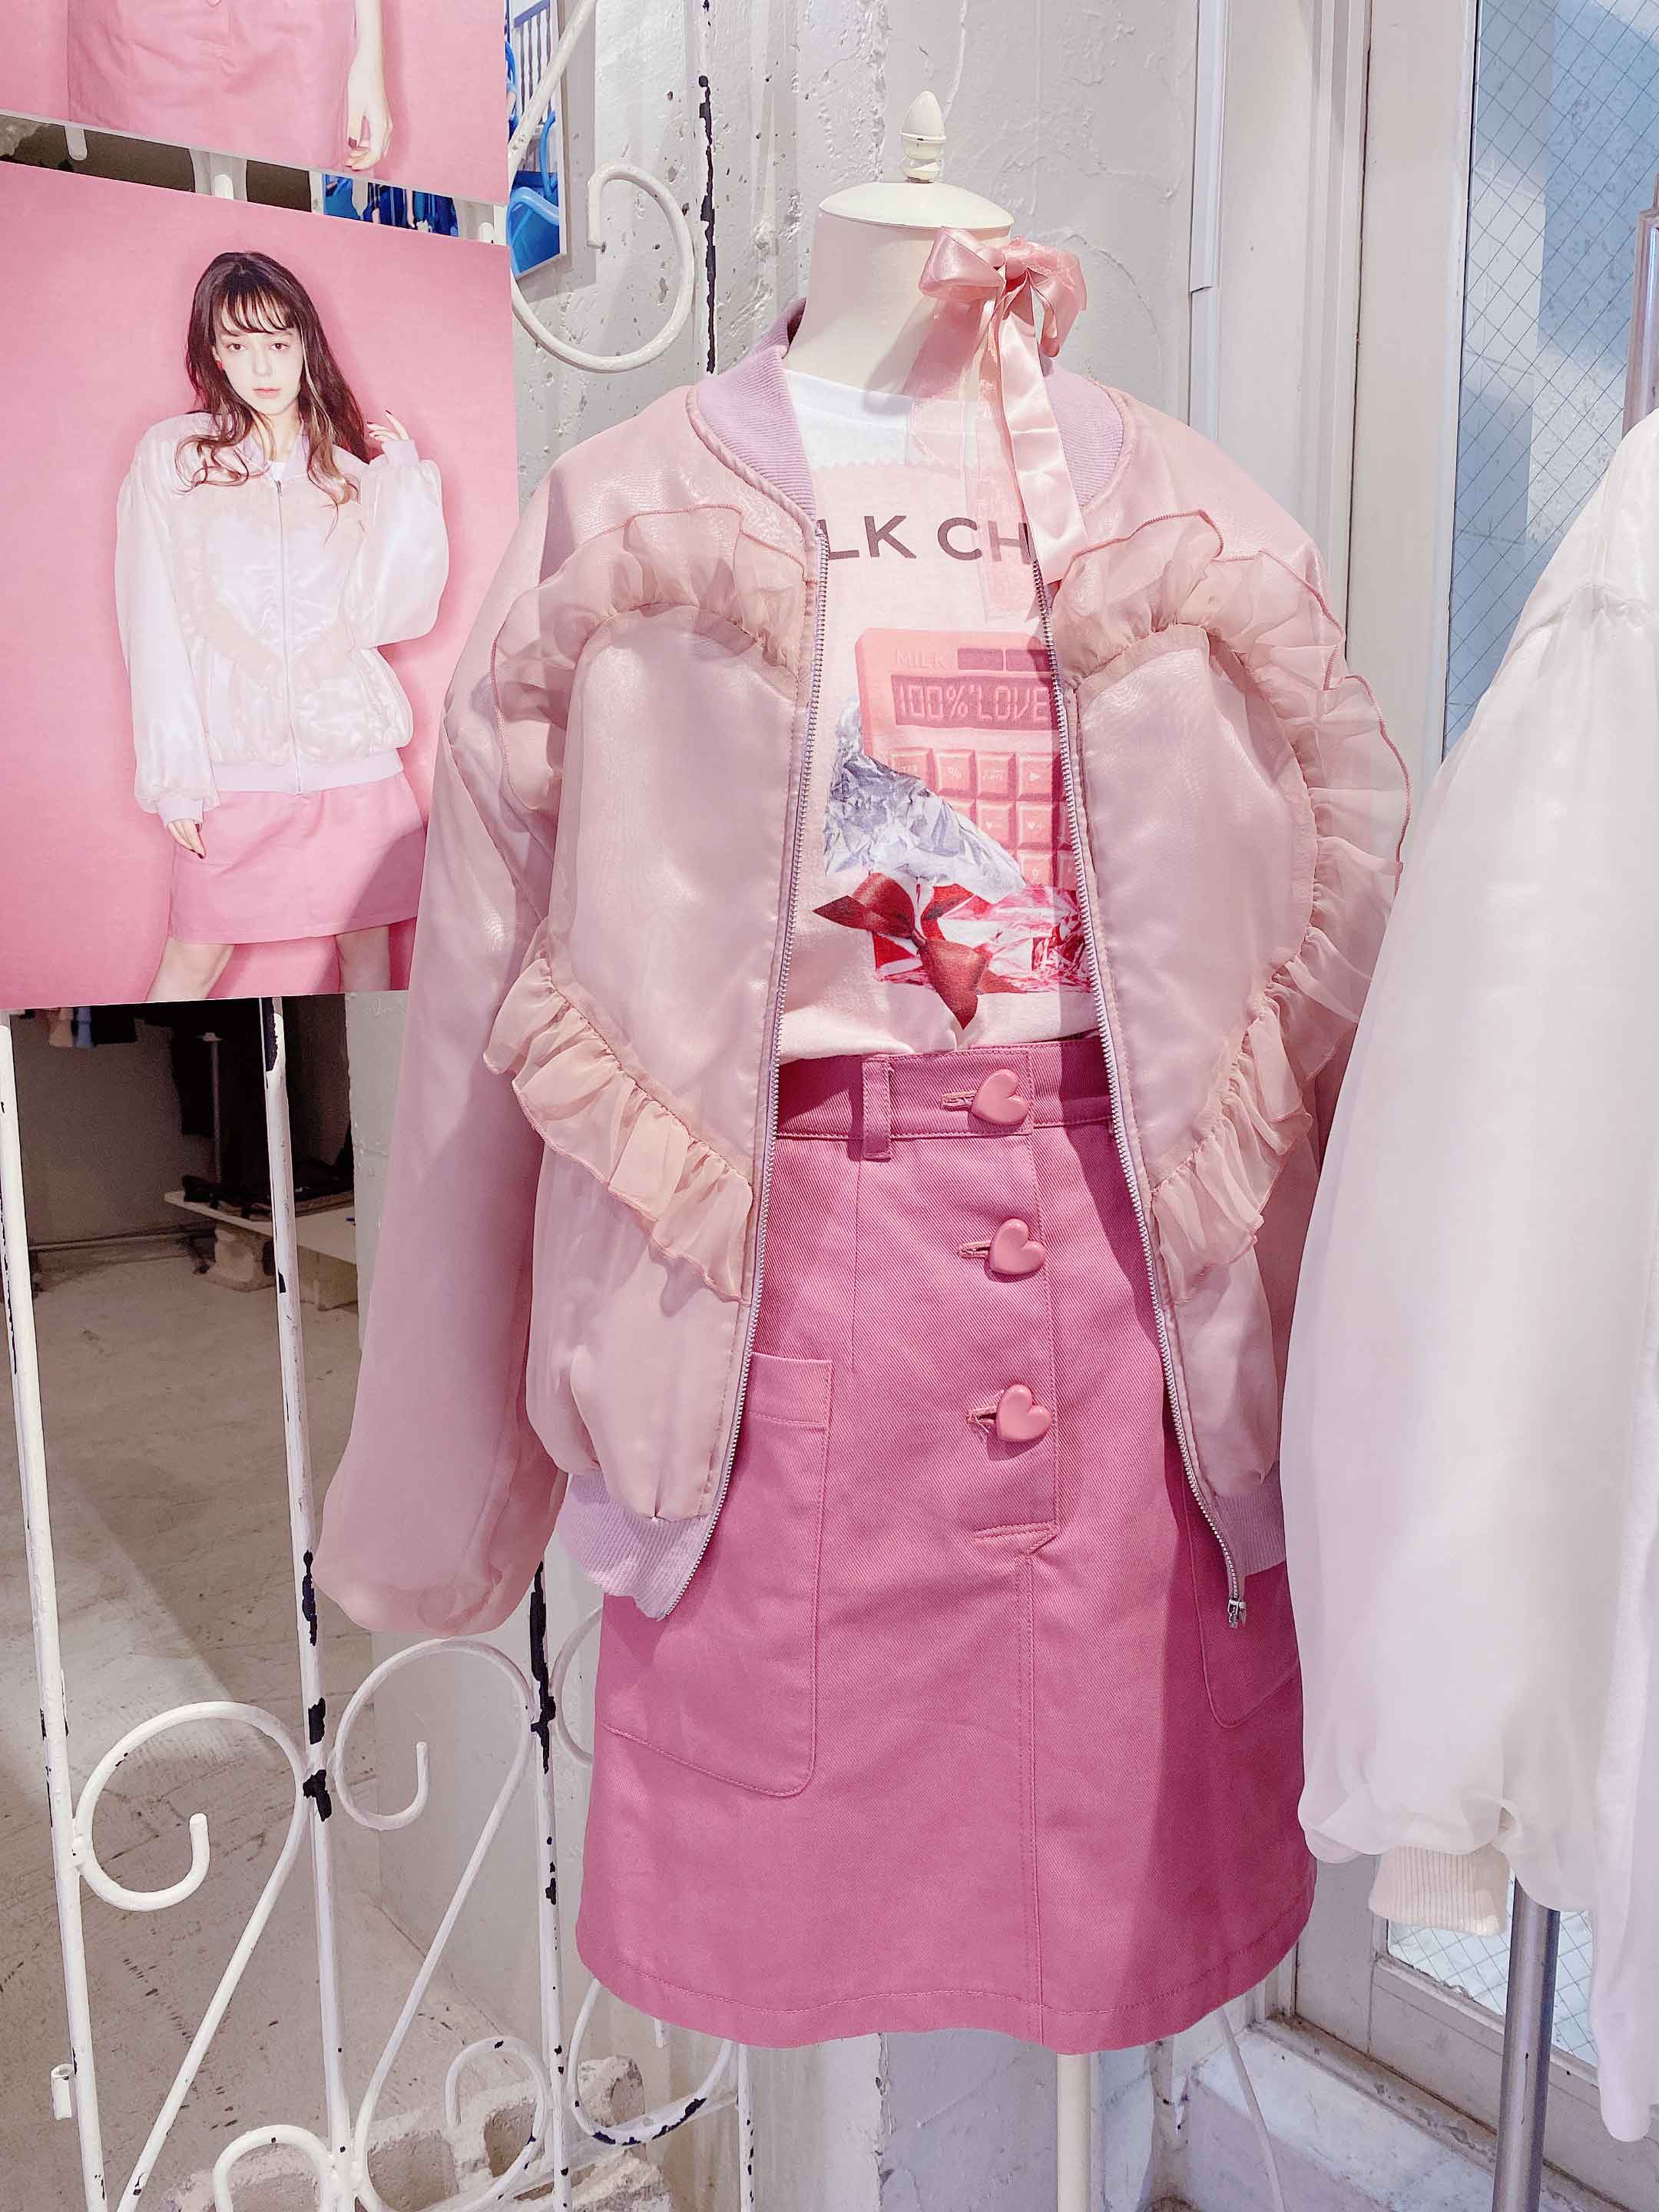 MILK」2021 Spring Collection展示会から新作をレポート！ 注目の